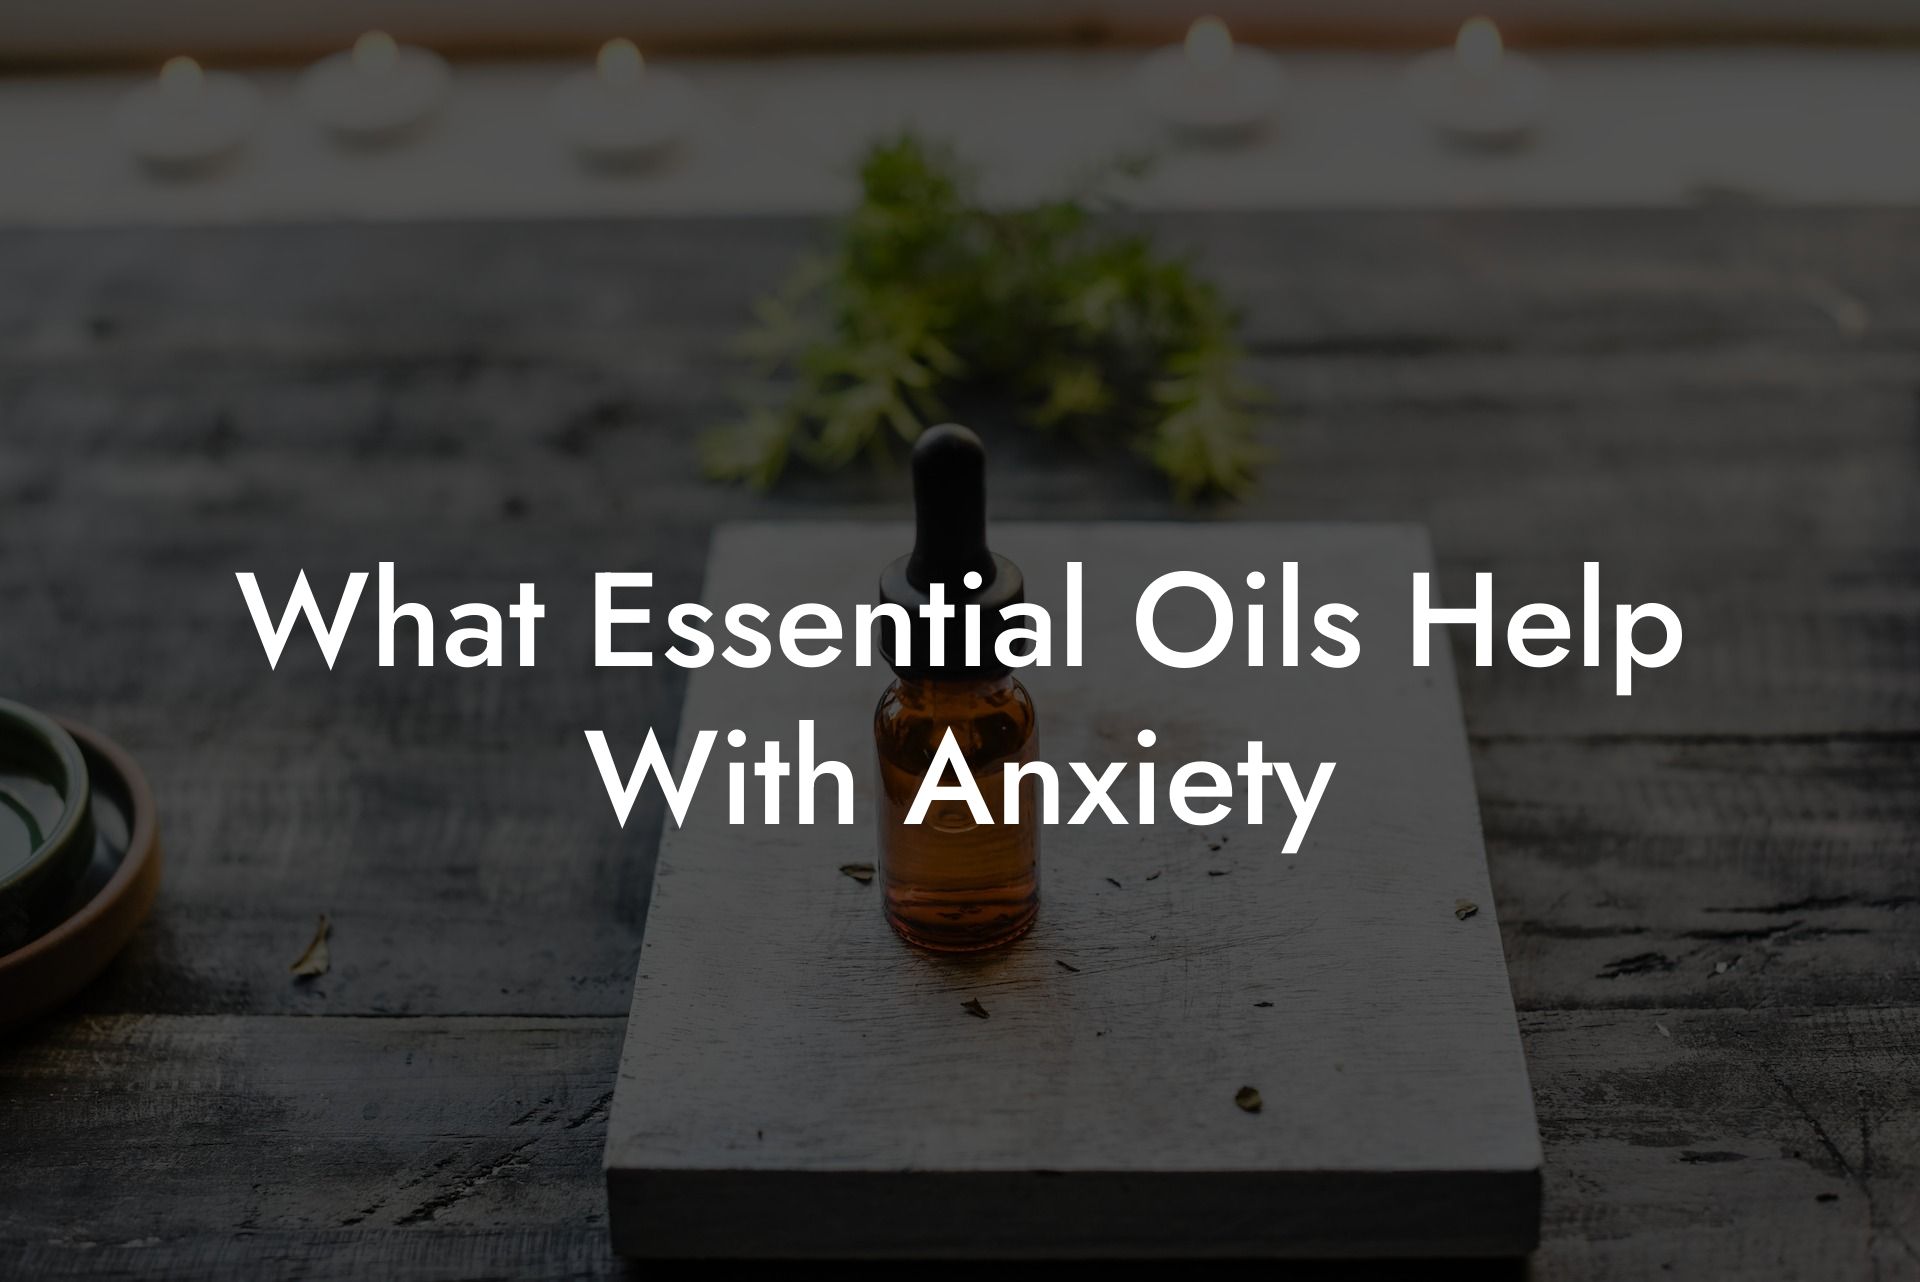 What Essential Oils Help With Anxiety